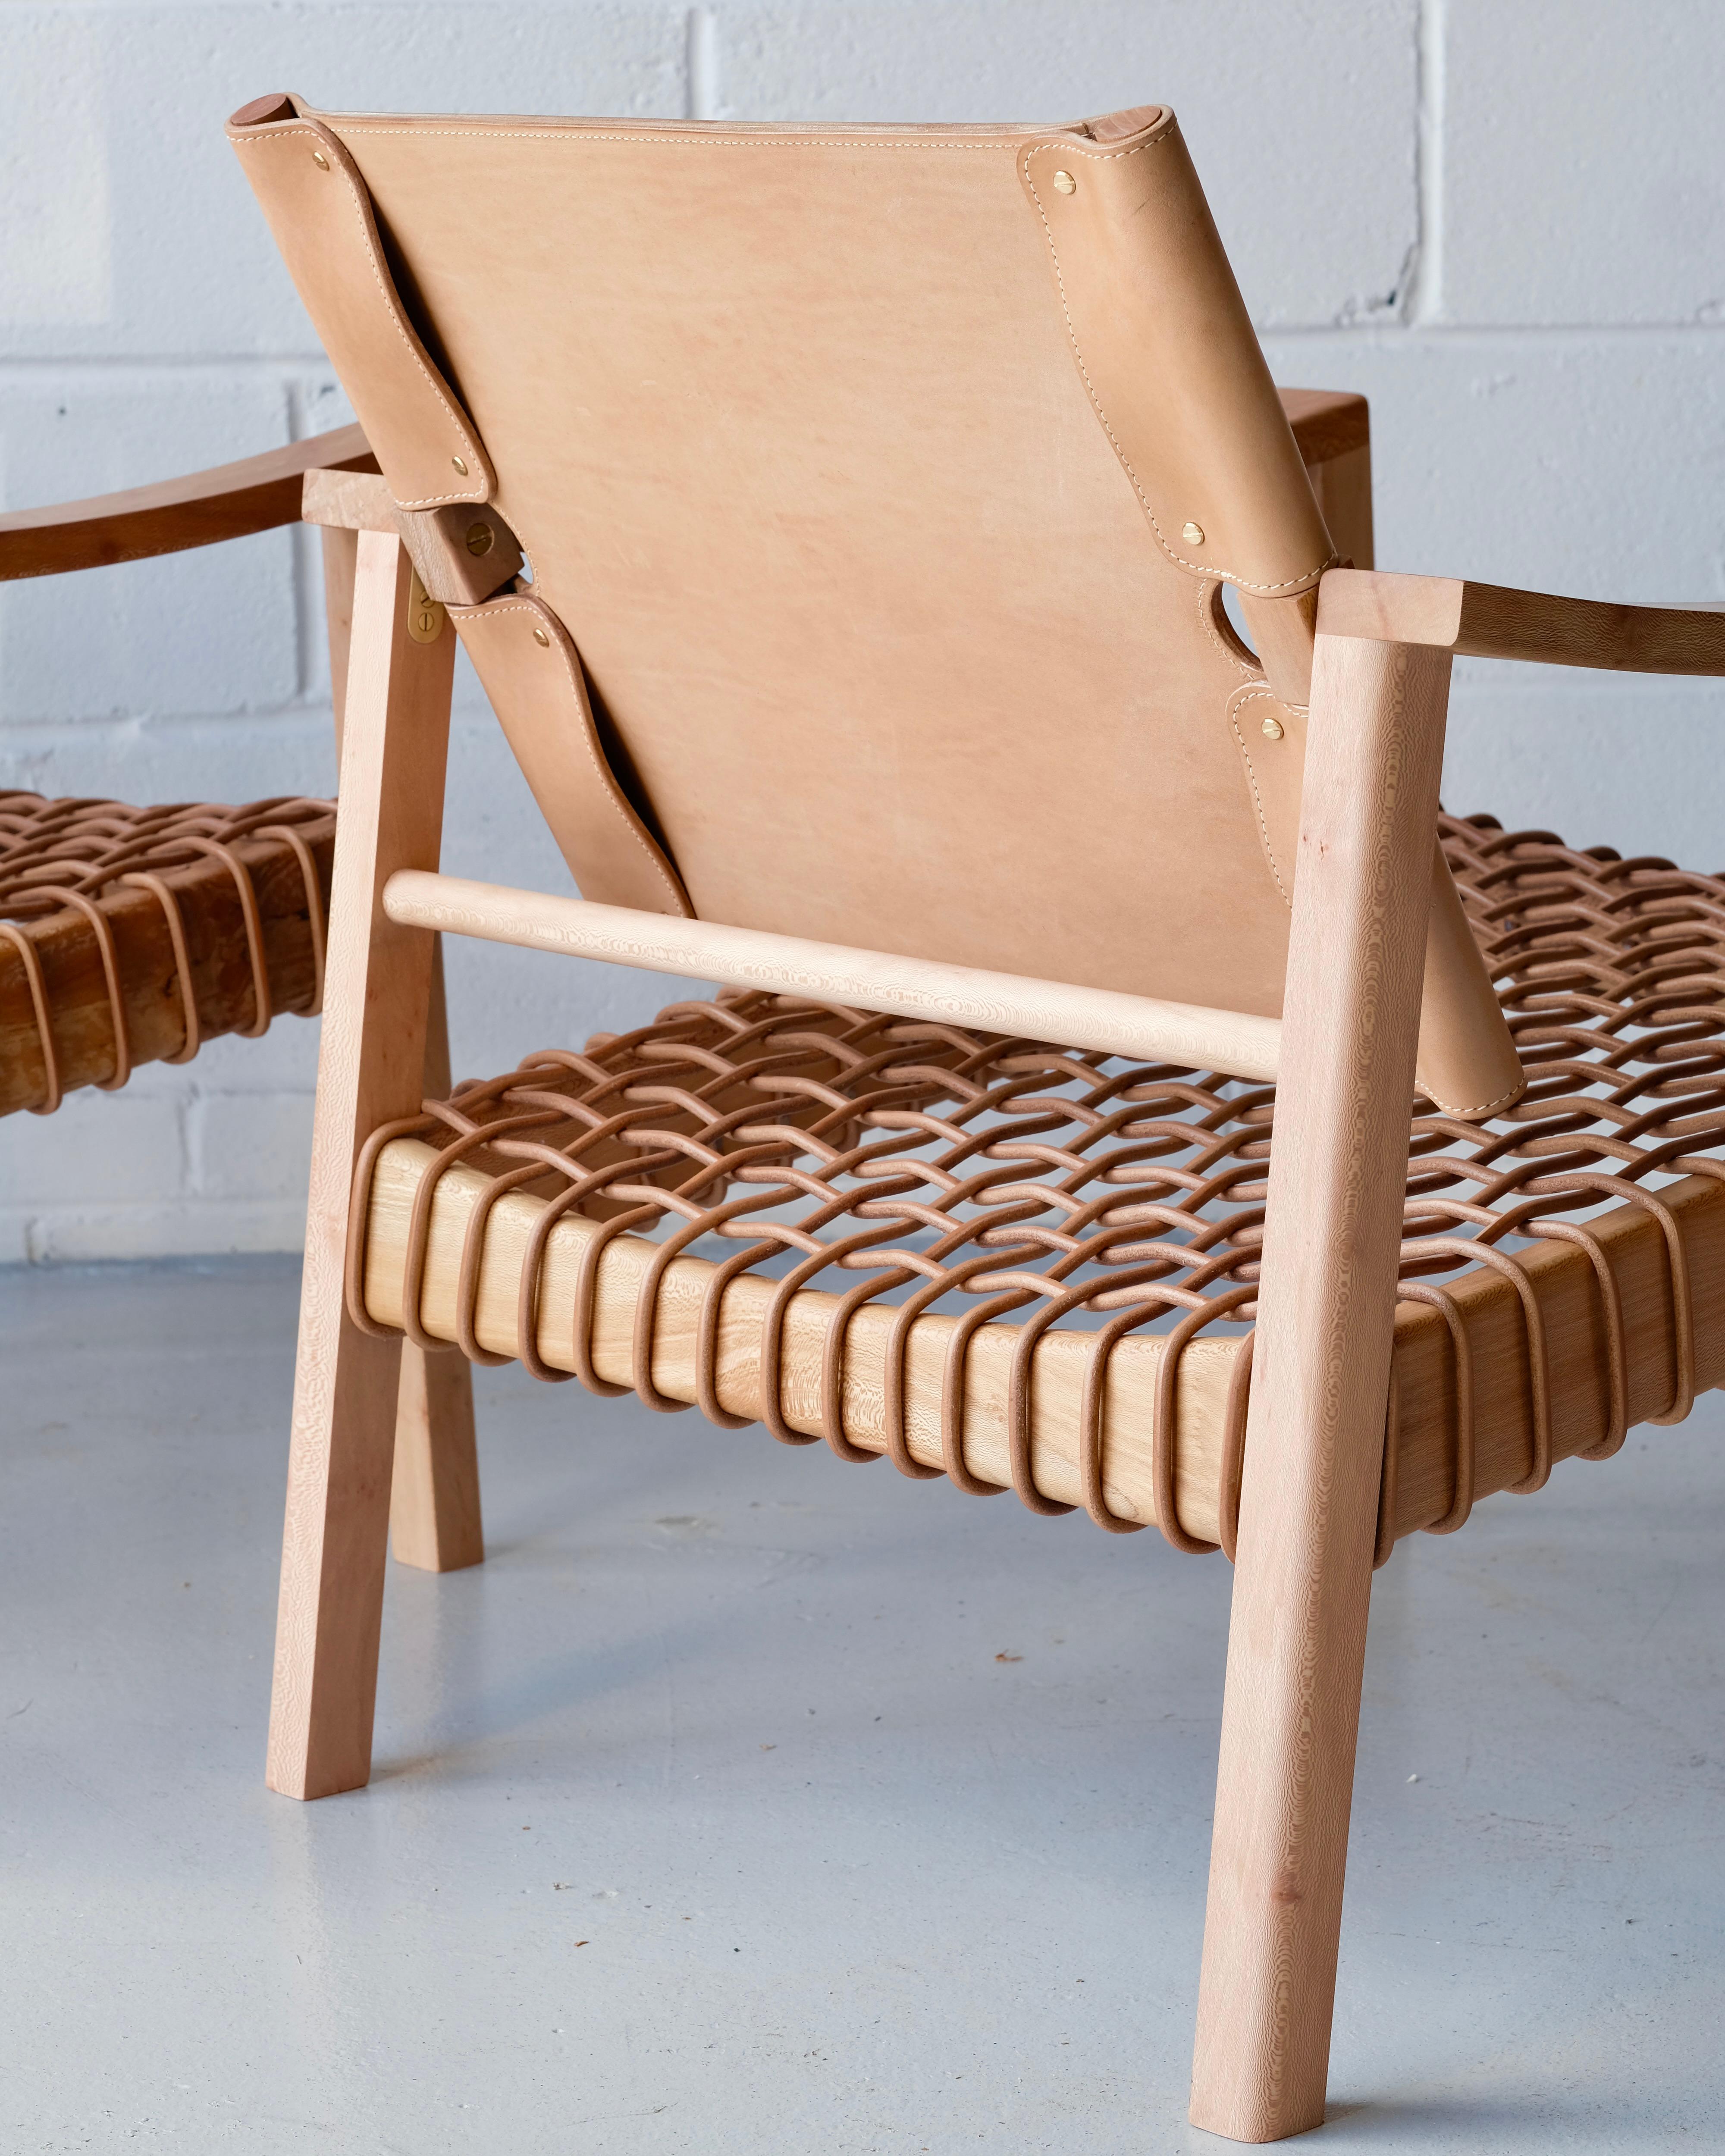 Camber Chair - woven leather cord and oak In New Condition For Sale In Norwich, England